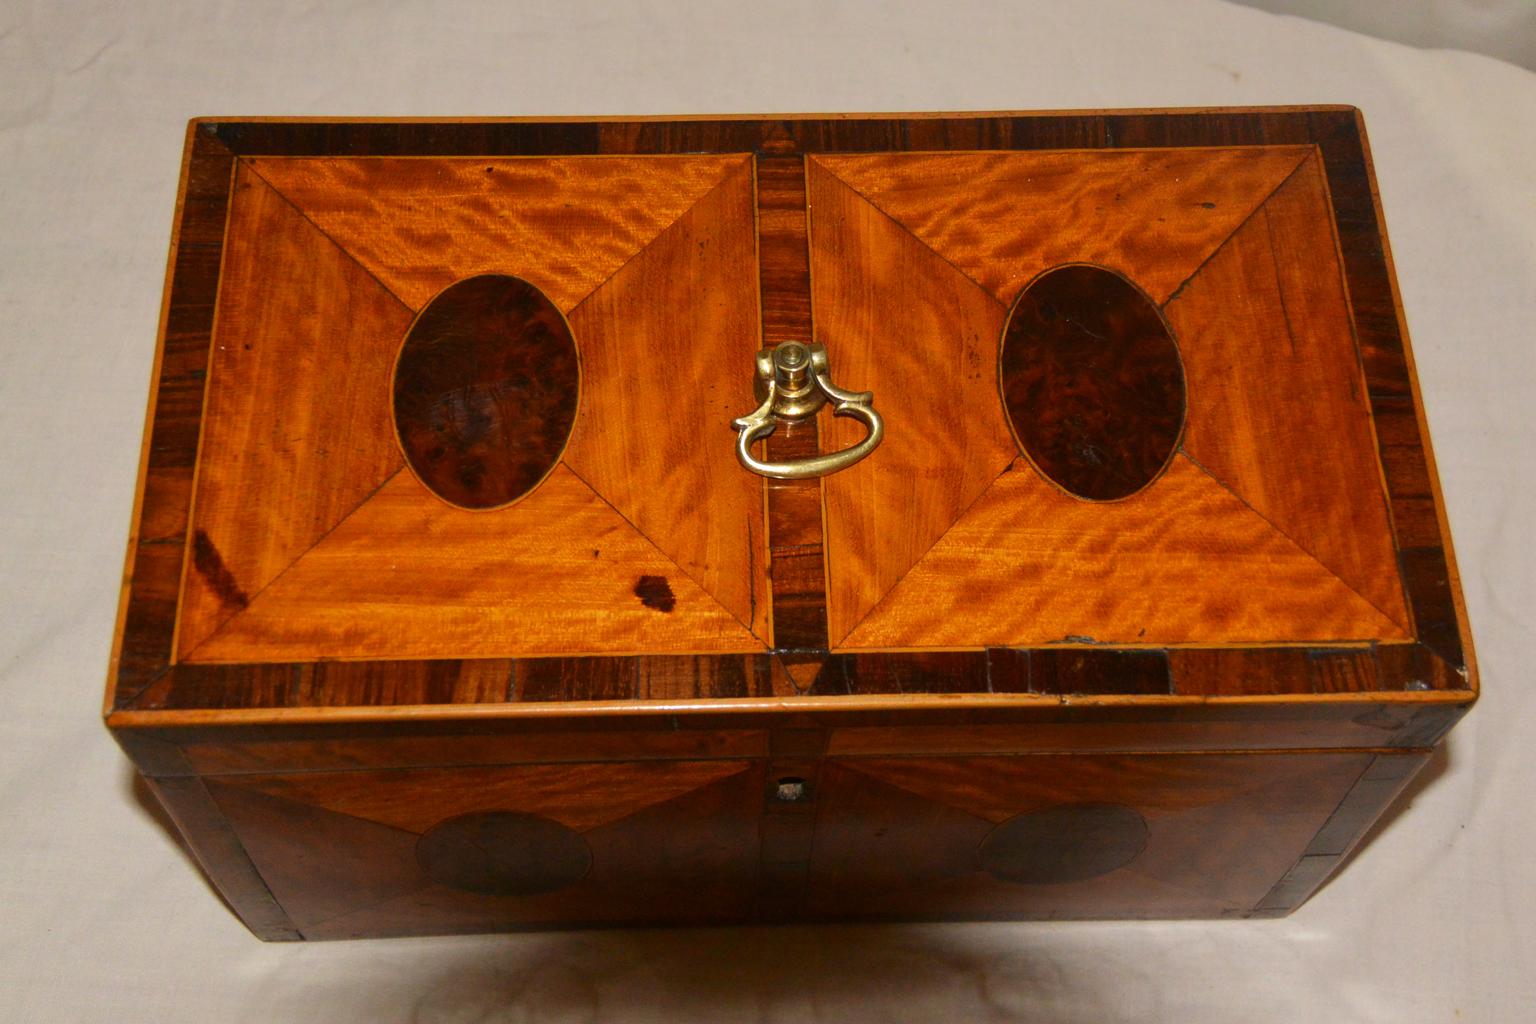 English George III satinwood double tea caddy with oval burl walnut inlays to all sides and the top. The kingwood crossbanding is enclosed by a thin line inlay of boxwood and is on all sides and the top. The interior lids have the same pattern of